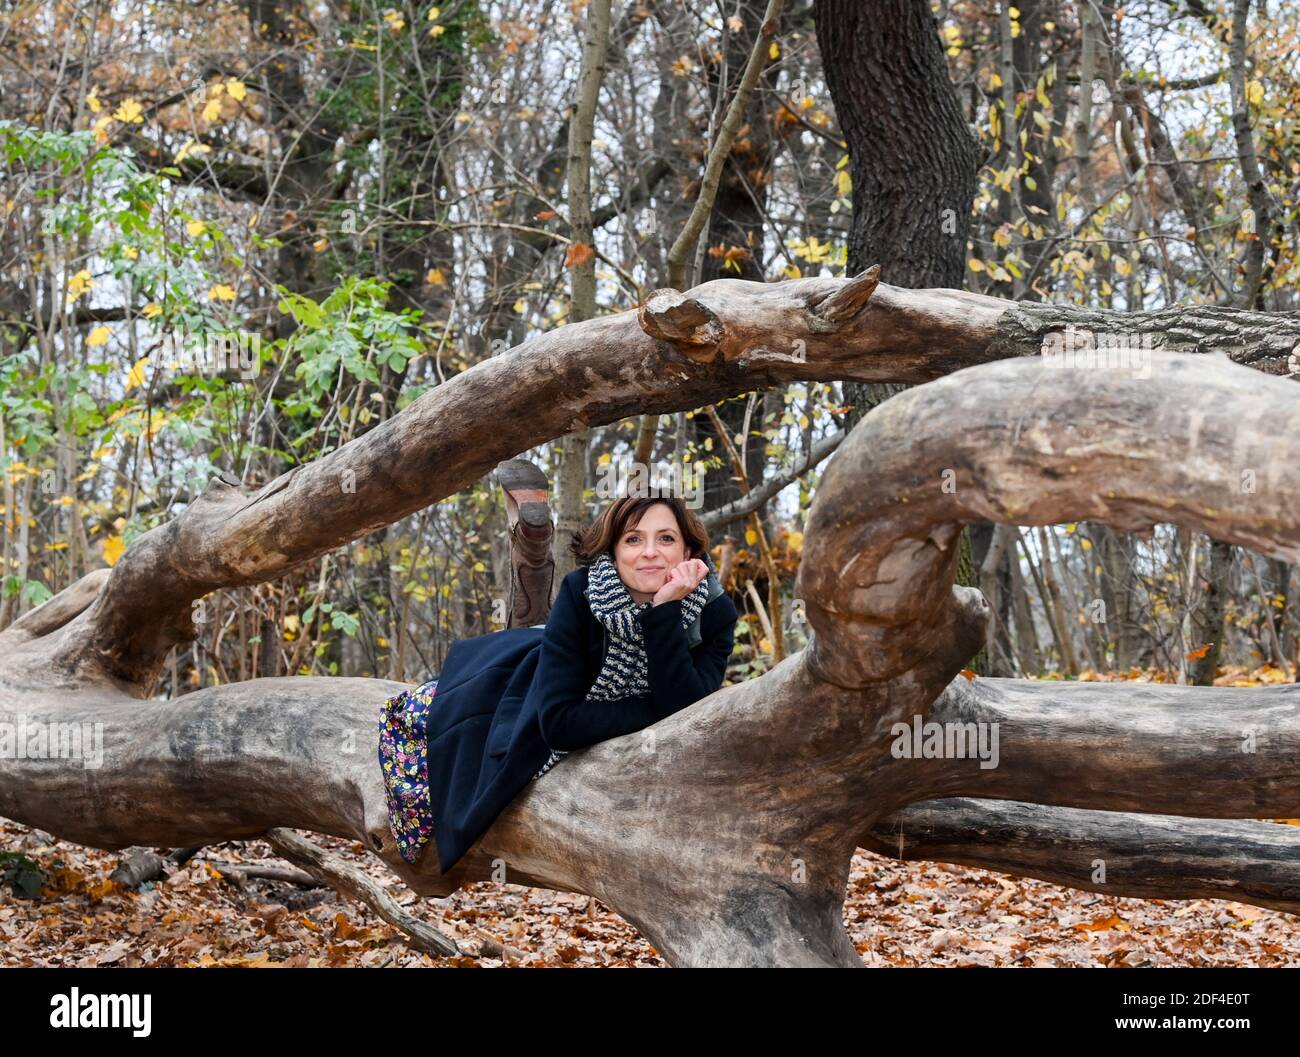 Berlin, Germany. 30th Nov, 2020. The actress Julia Brendler during a walk in the park Schönholzer Heide in Niederschönhausen She plays the leading role in the film of the ZDF series 'Katie Fforde: Emmas Geheimnis', which will be broadcast on 06.12.2020 at 20.15. Credit: Jens Kalaene/dpa-Zentralbild/dpa/Alamy Live News Stock Photo